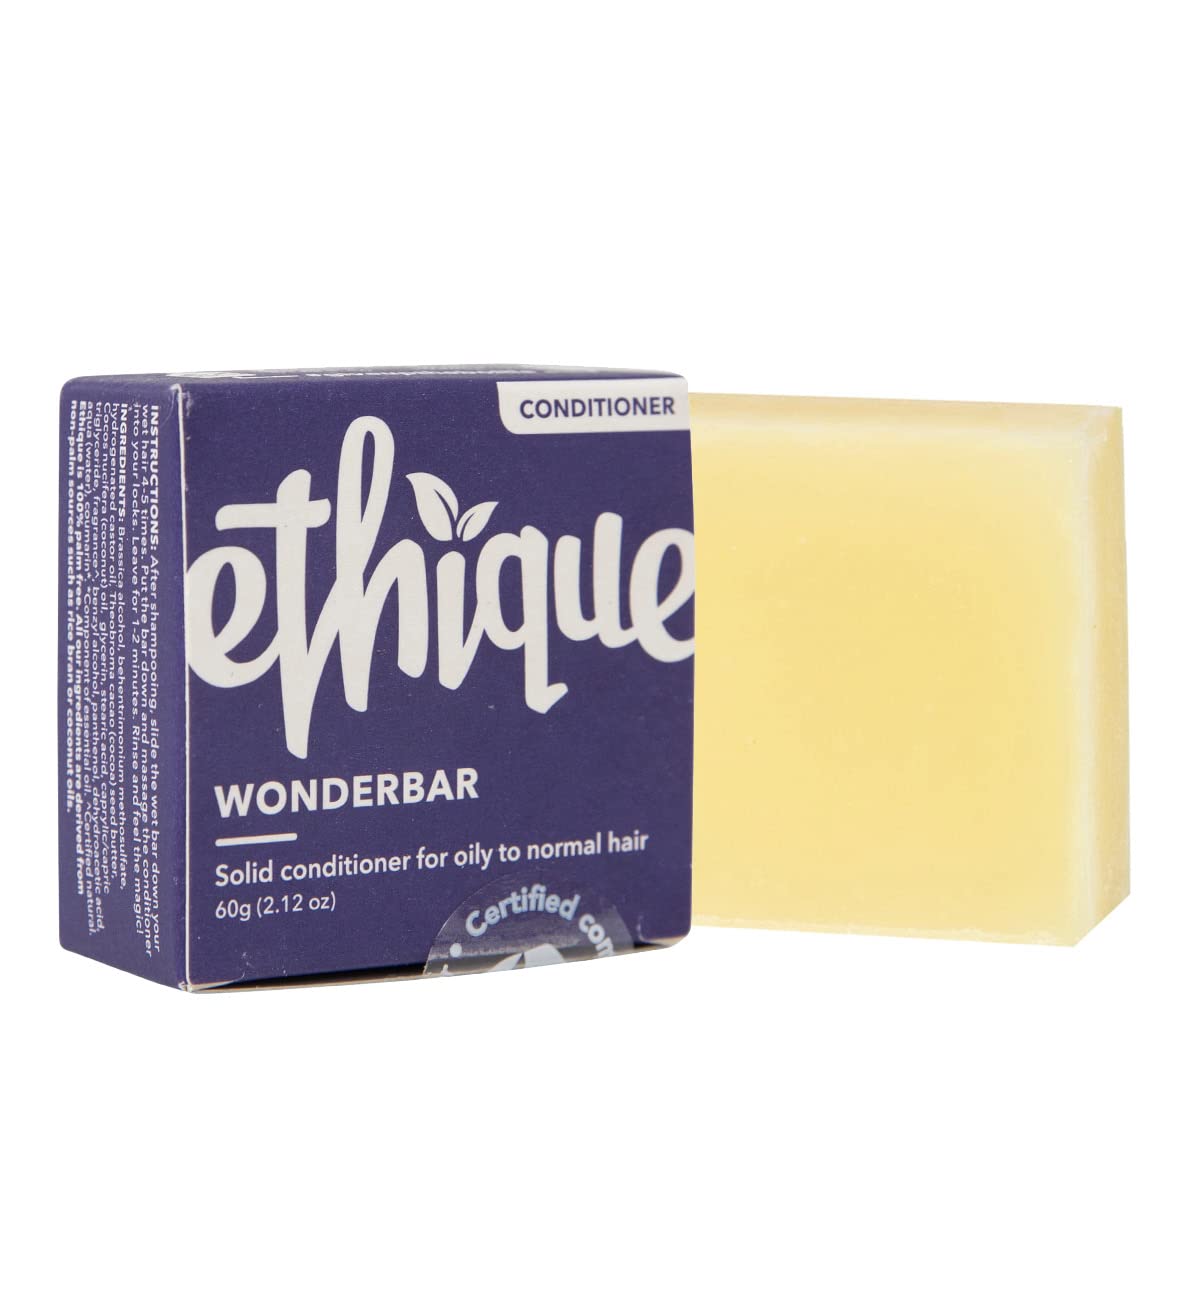 Ethique Wonderbar- Lightweight Solid Conditioner Bar for Oily to Balanced Hair - Vegan, Eco-Friendly, Plastic-Free, Cruelty-Free, 2.12 oz (Pack of 1)